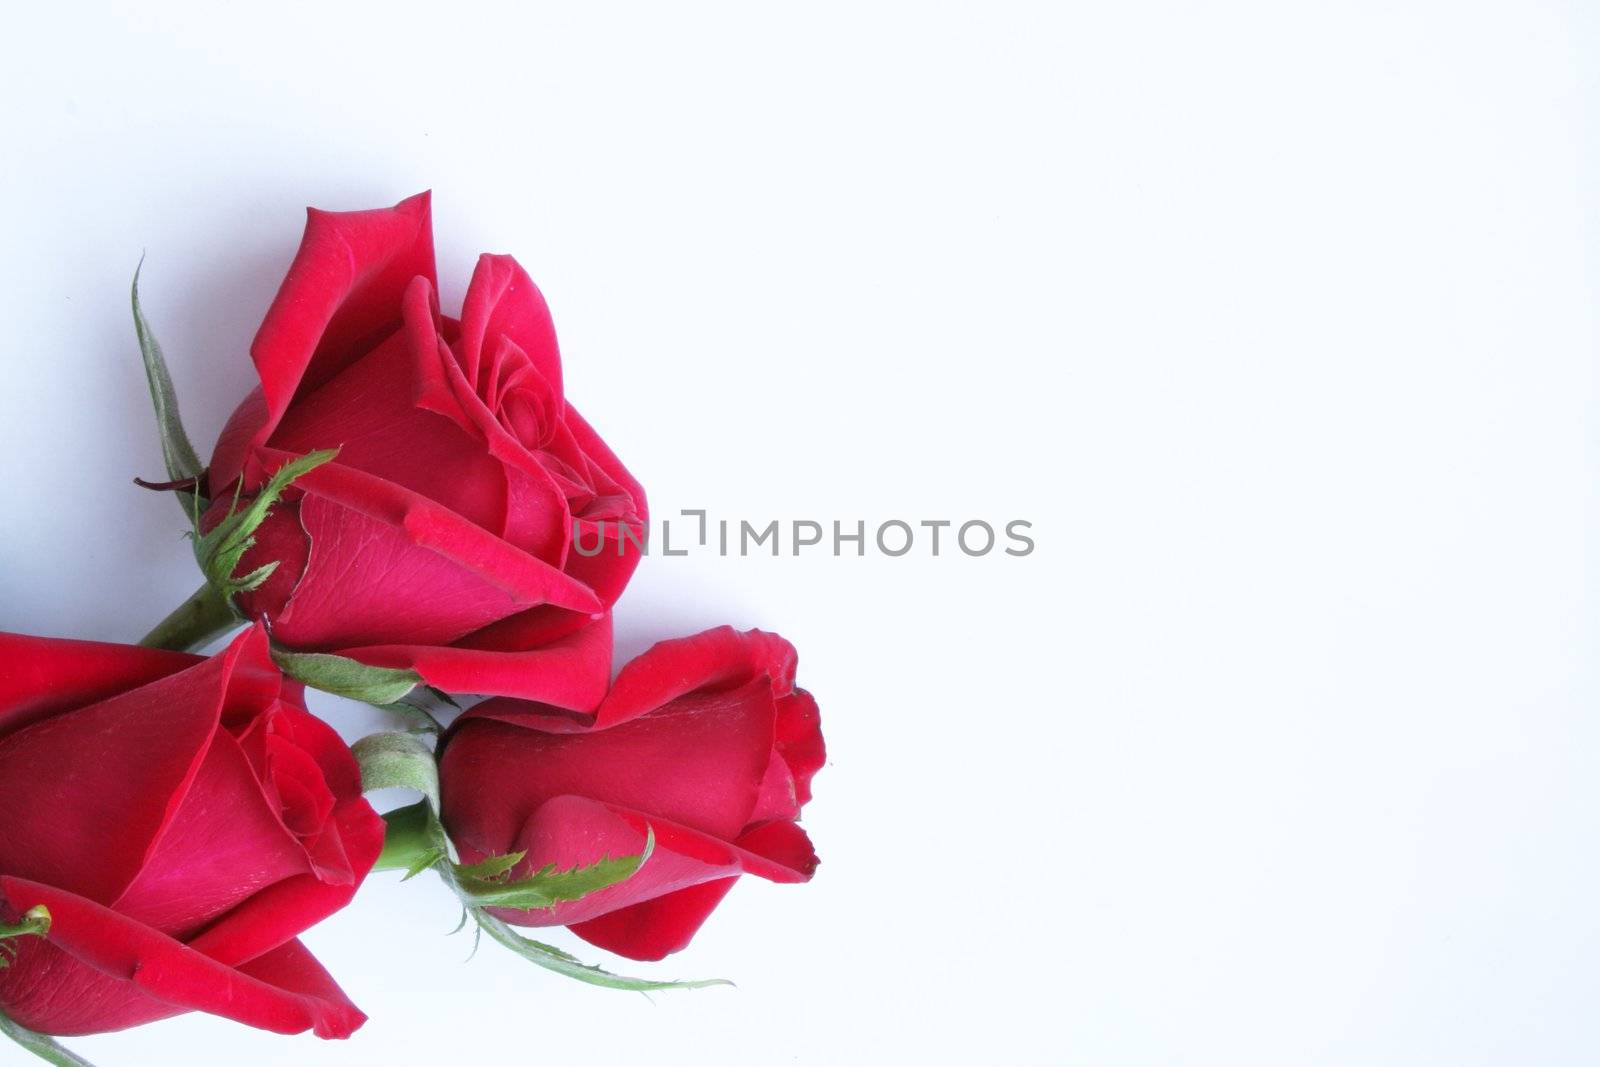 Three red roses on white paper